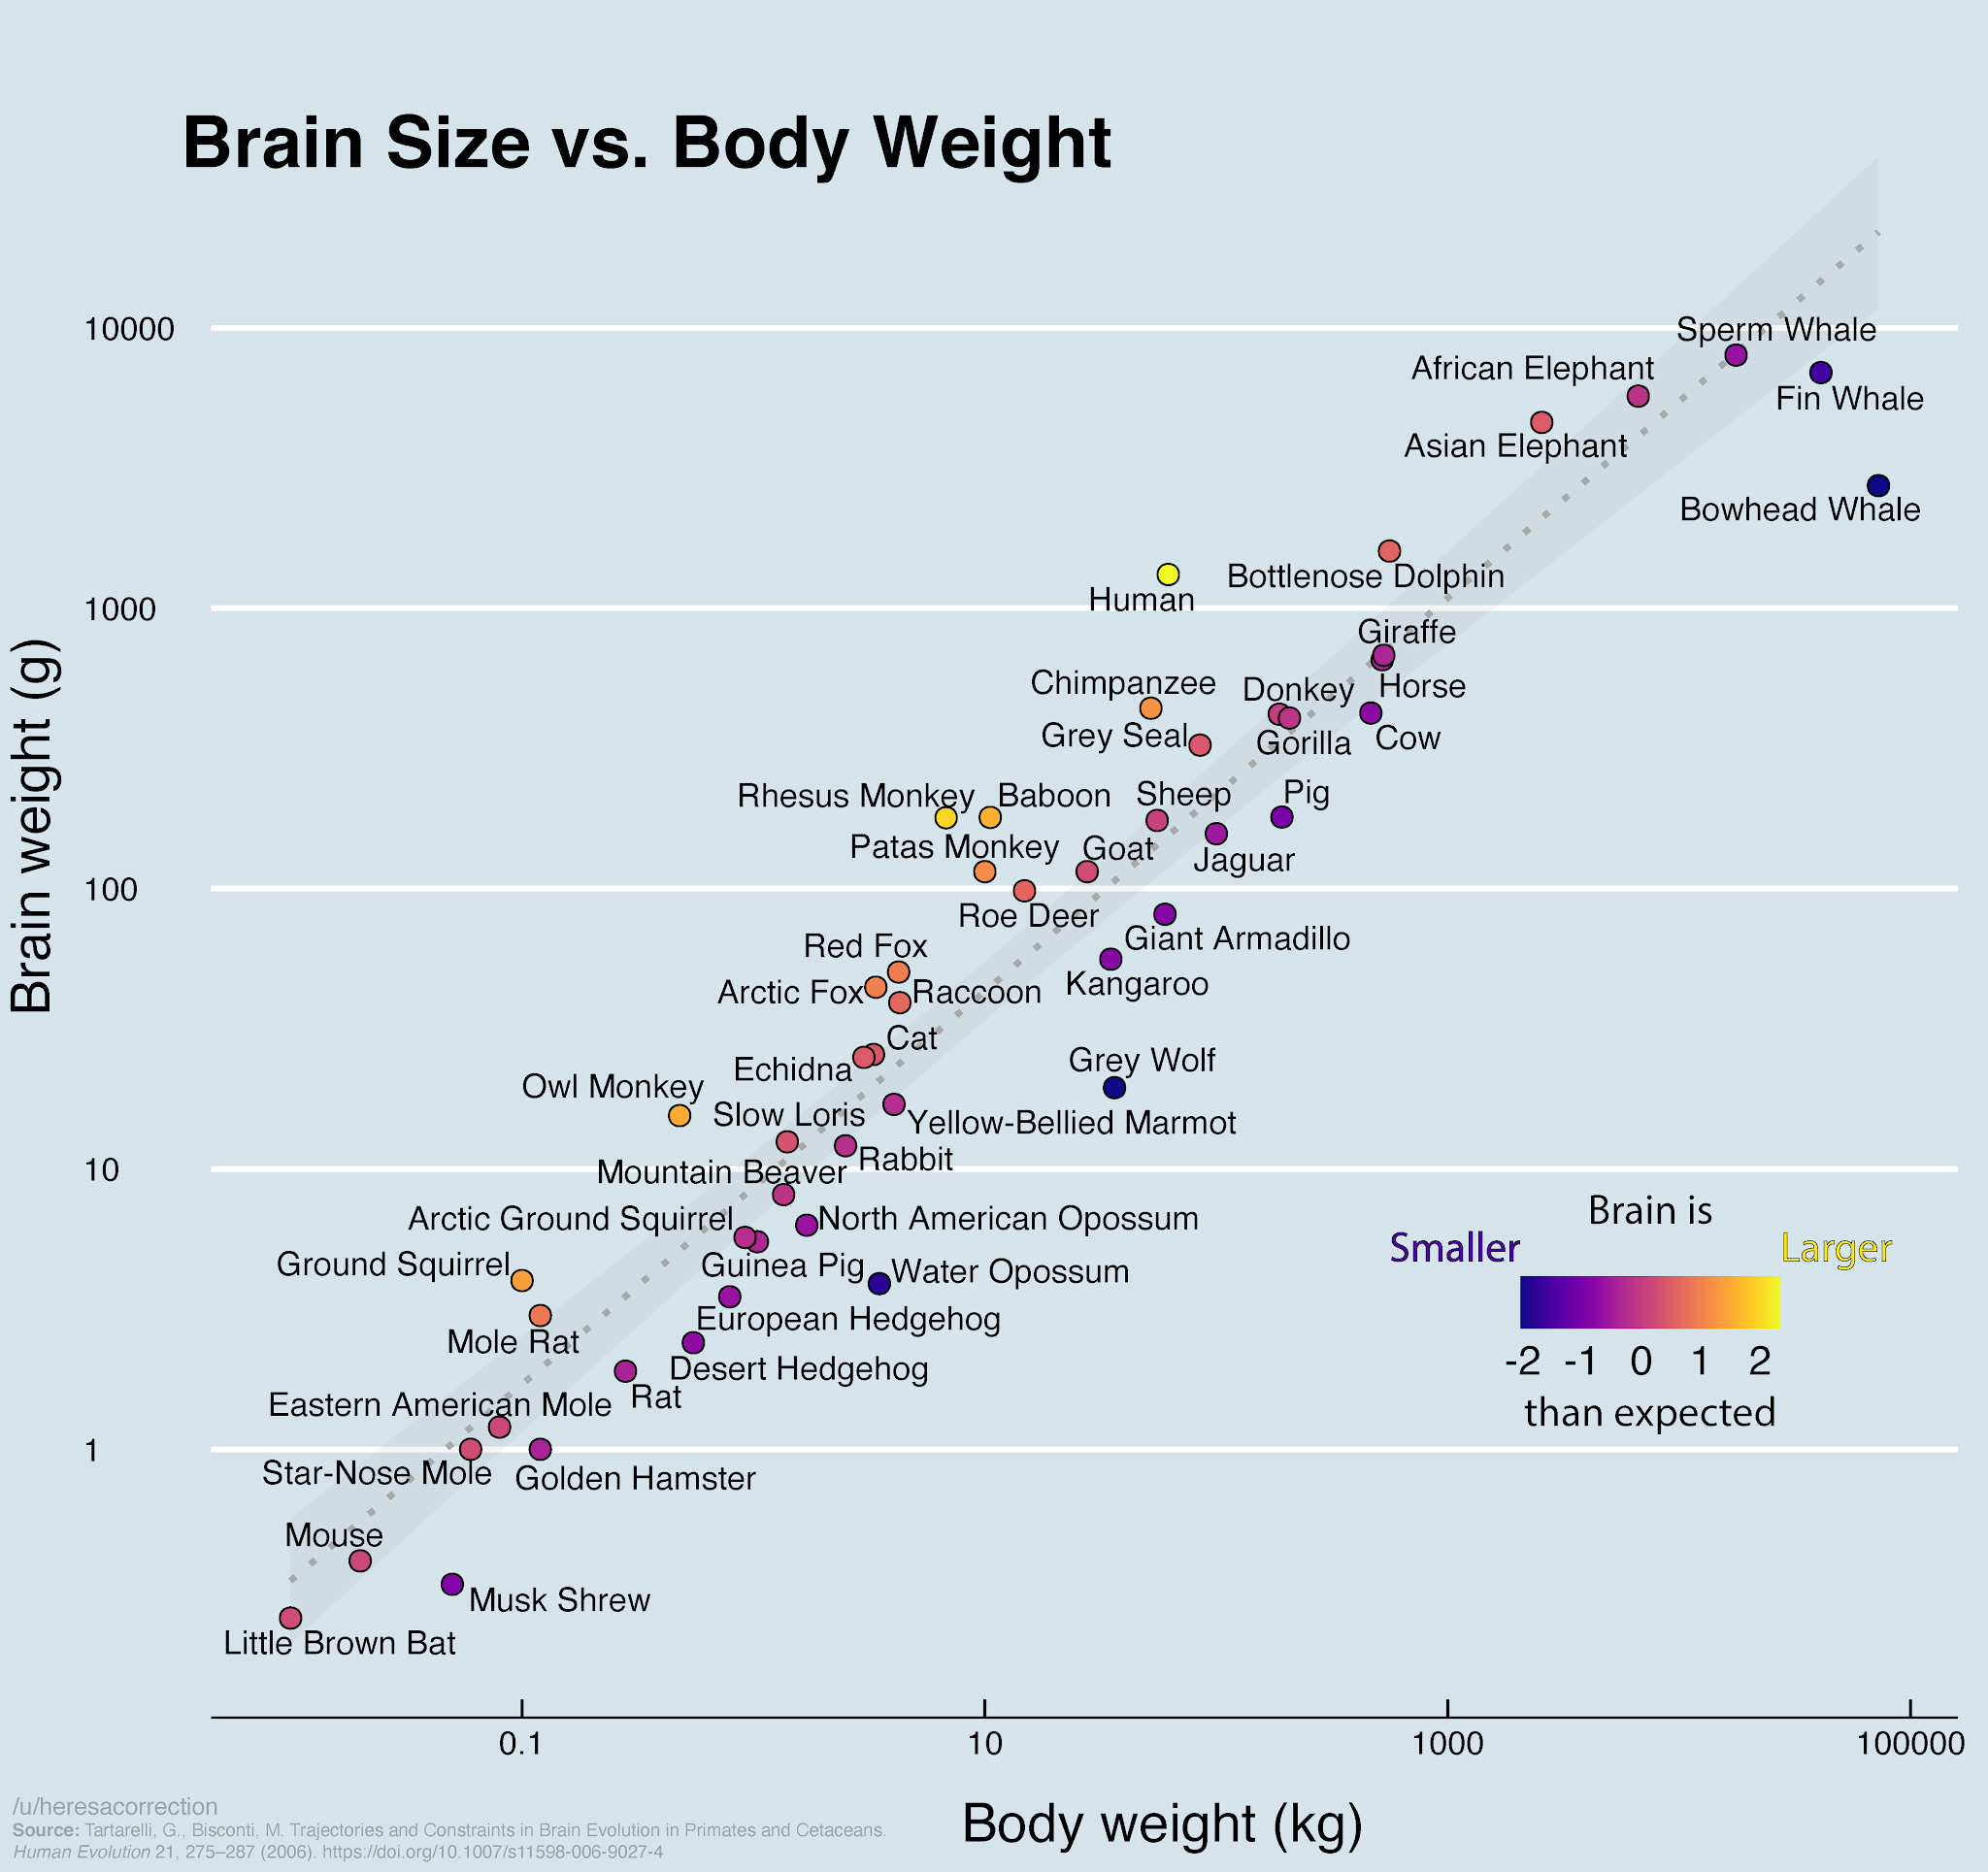 rain size vs. body weight of various animals and humans